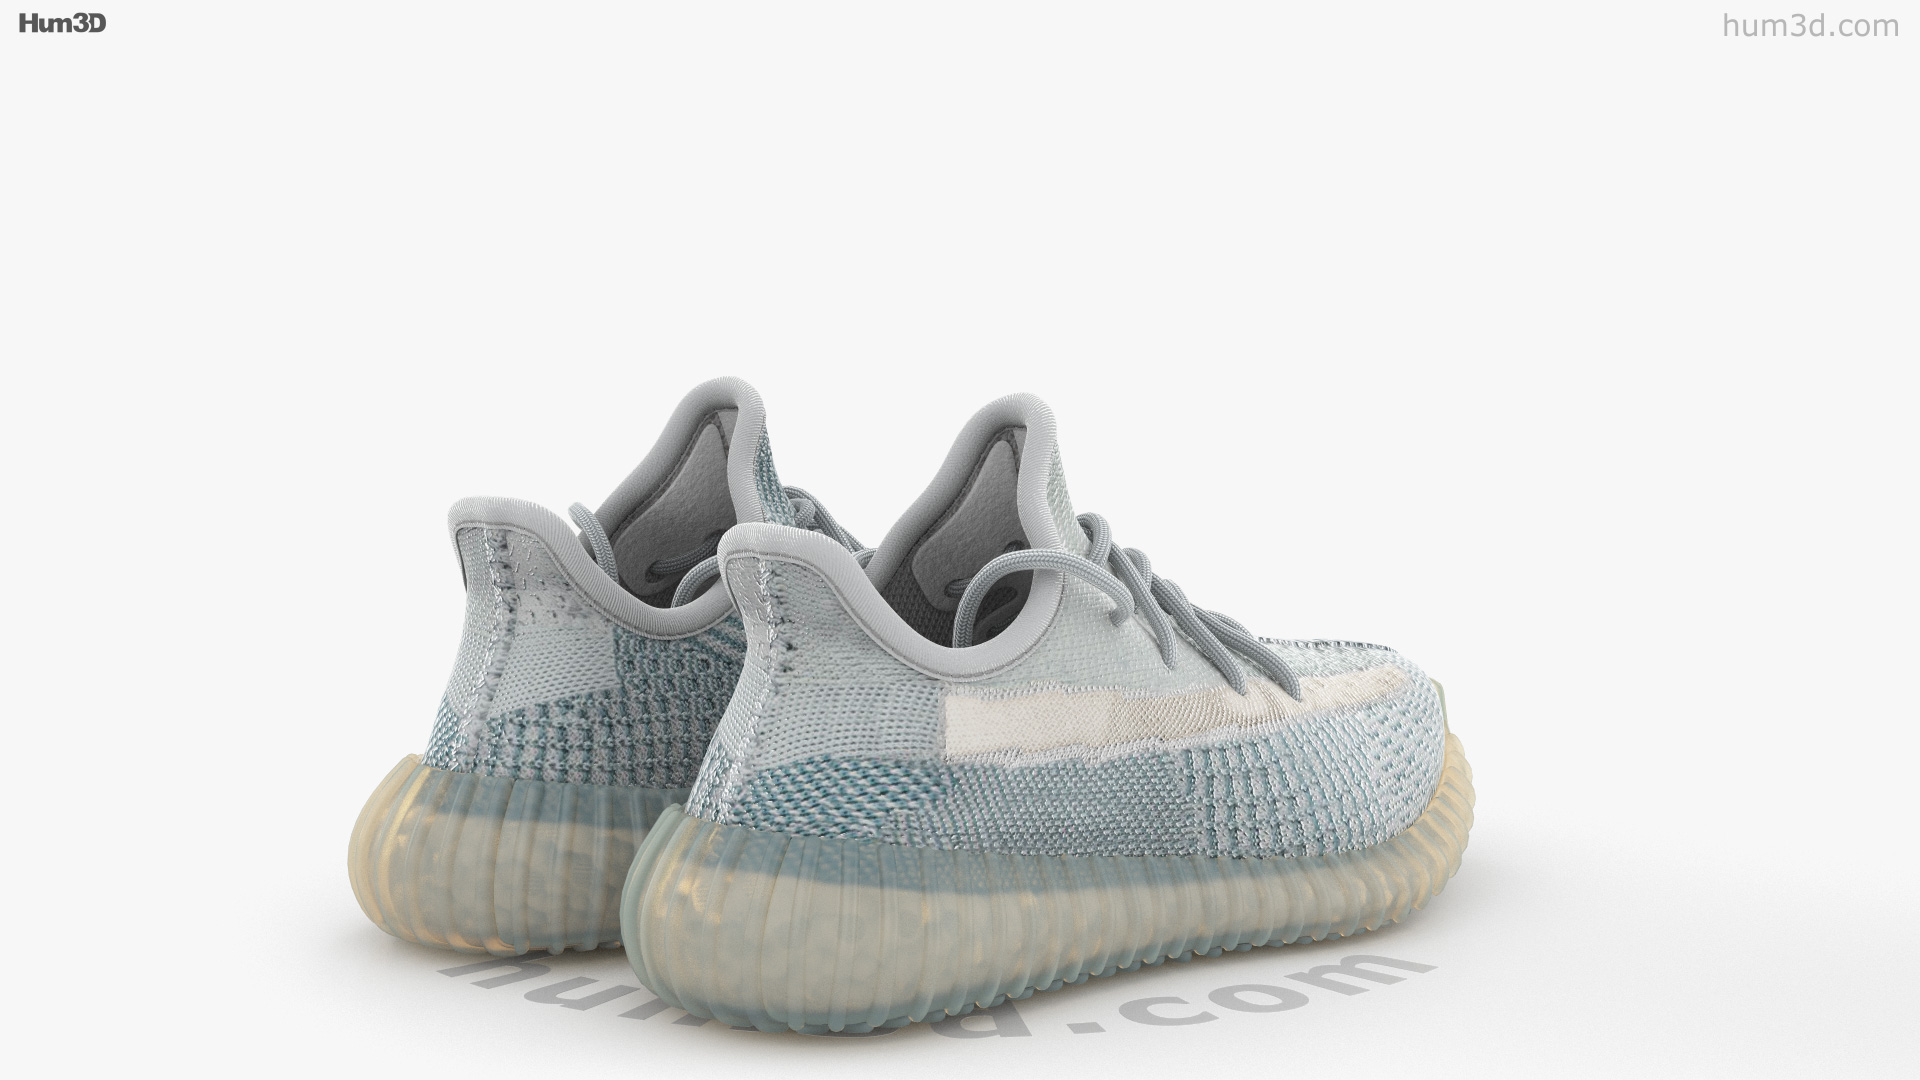 360 view of Adidas Yeezy Boost 350 3D 